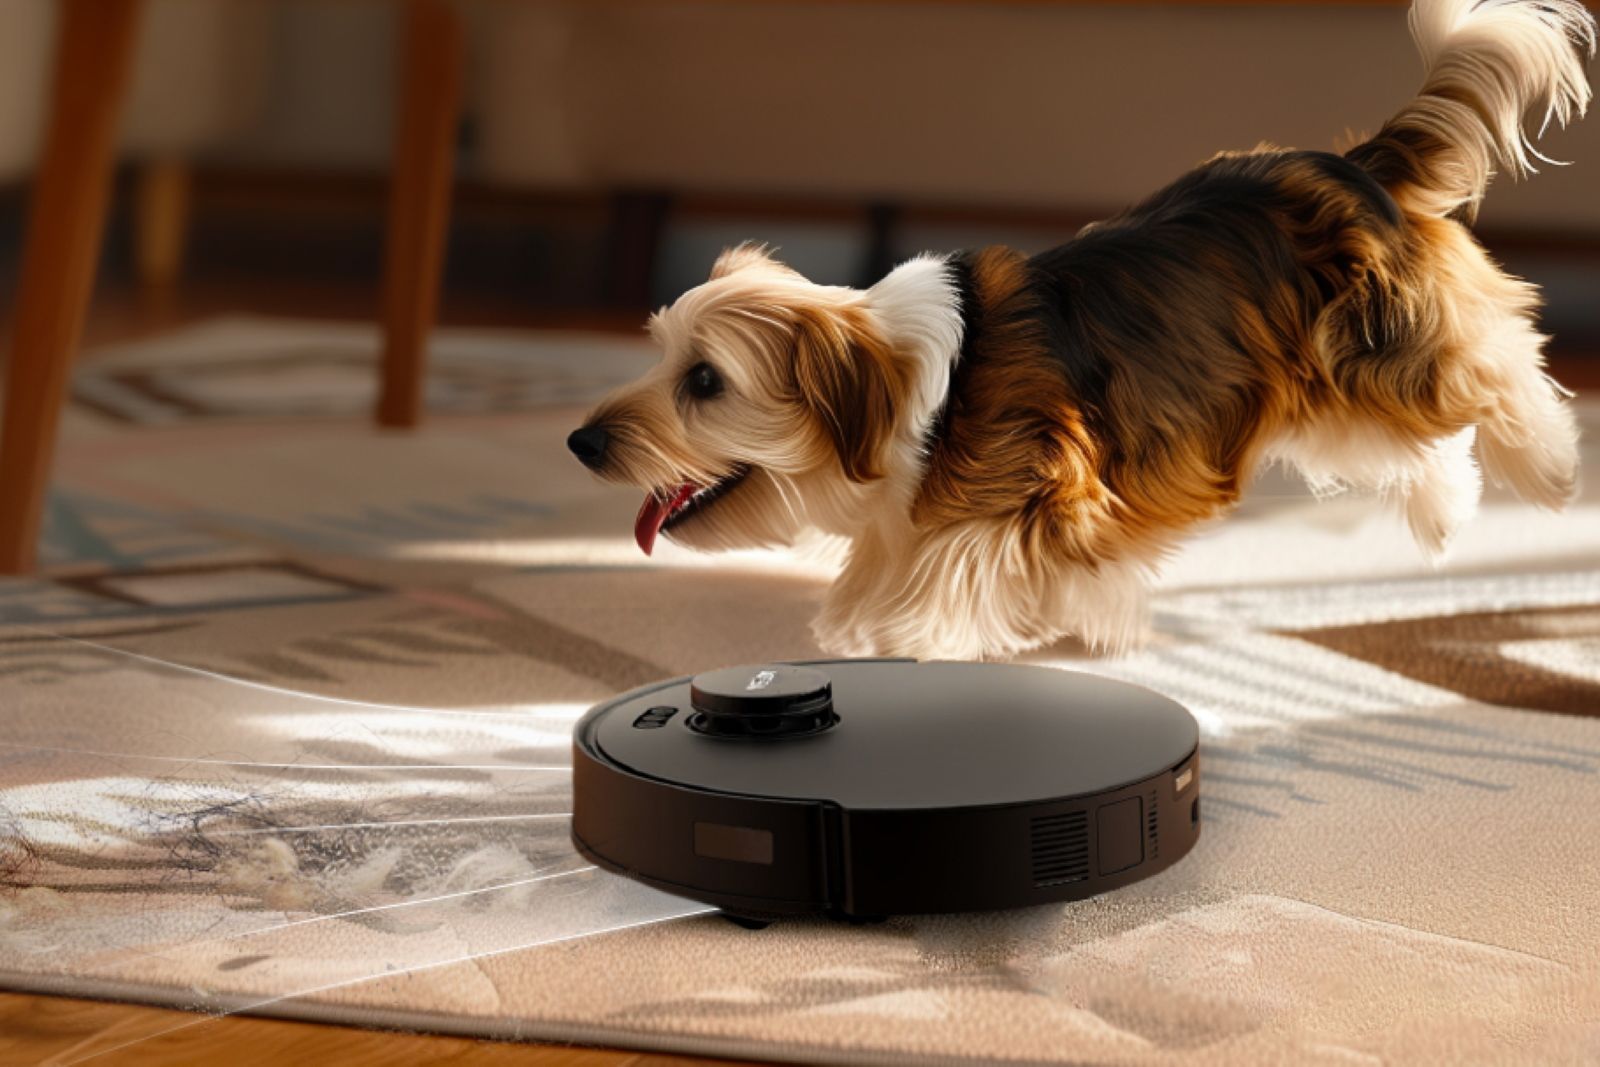 A dog next to the M12 Pro+ vacuuming hair